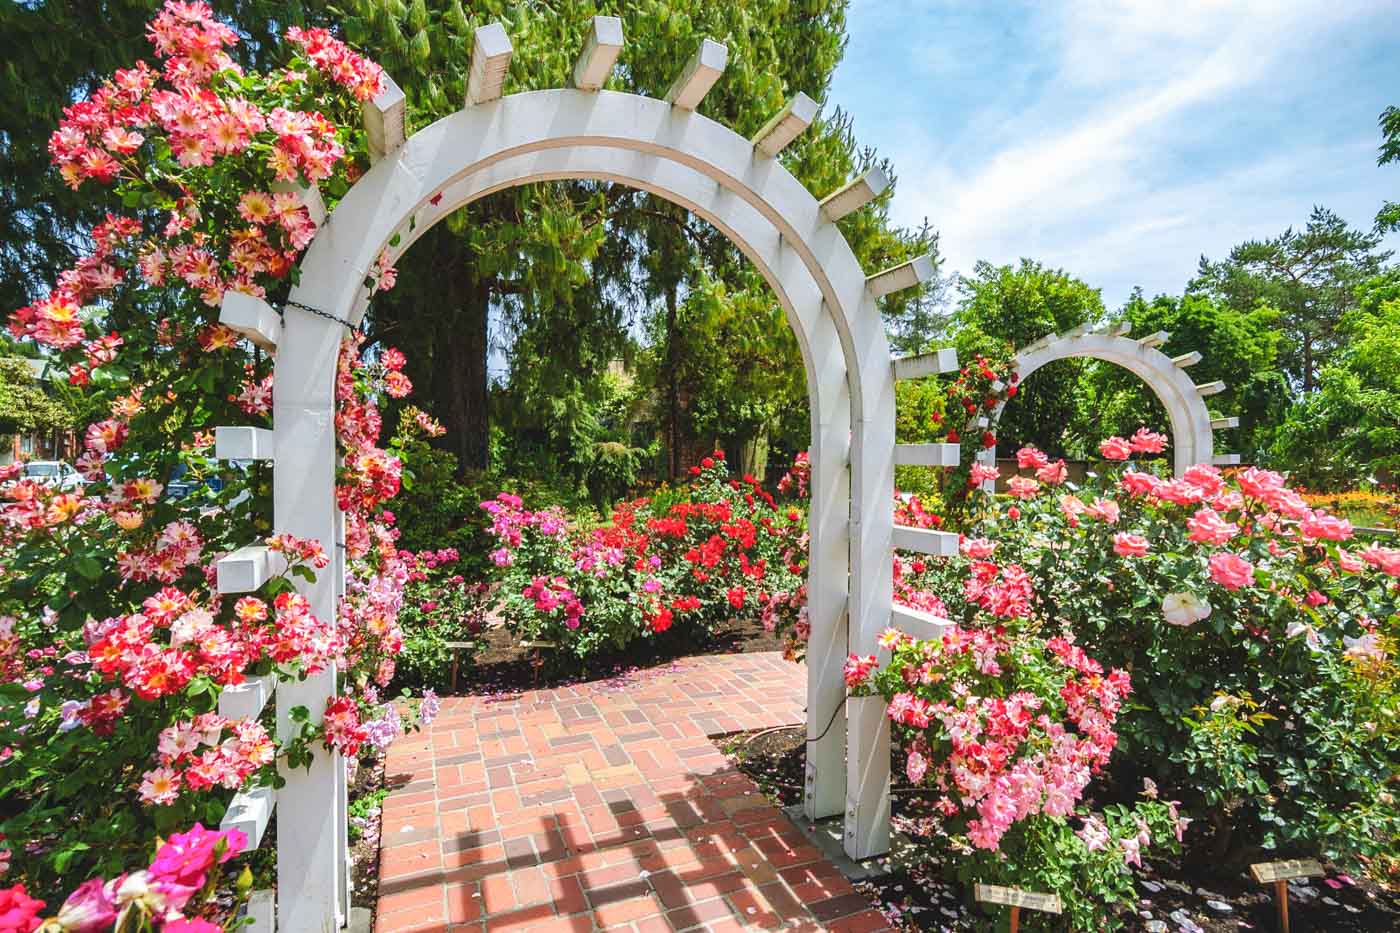 Two white wooden arches surrounded by pink flowers on a sunny day in Luther Burbank Gardens.